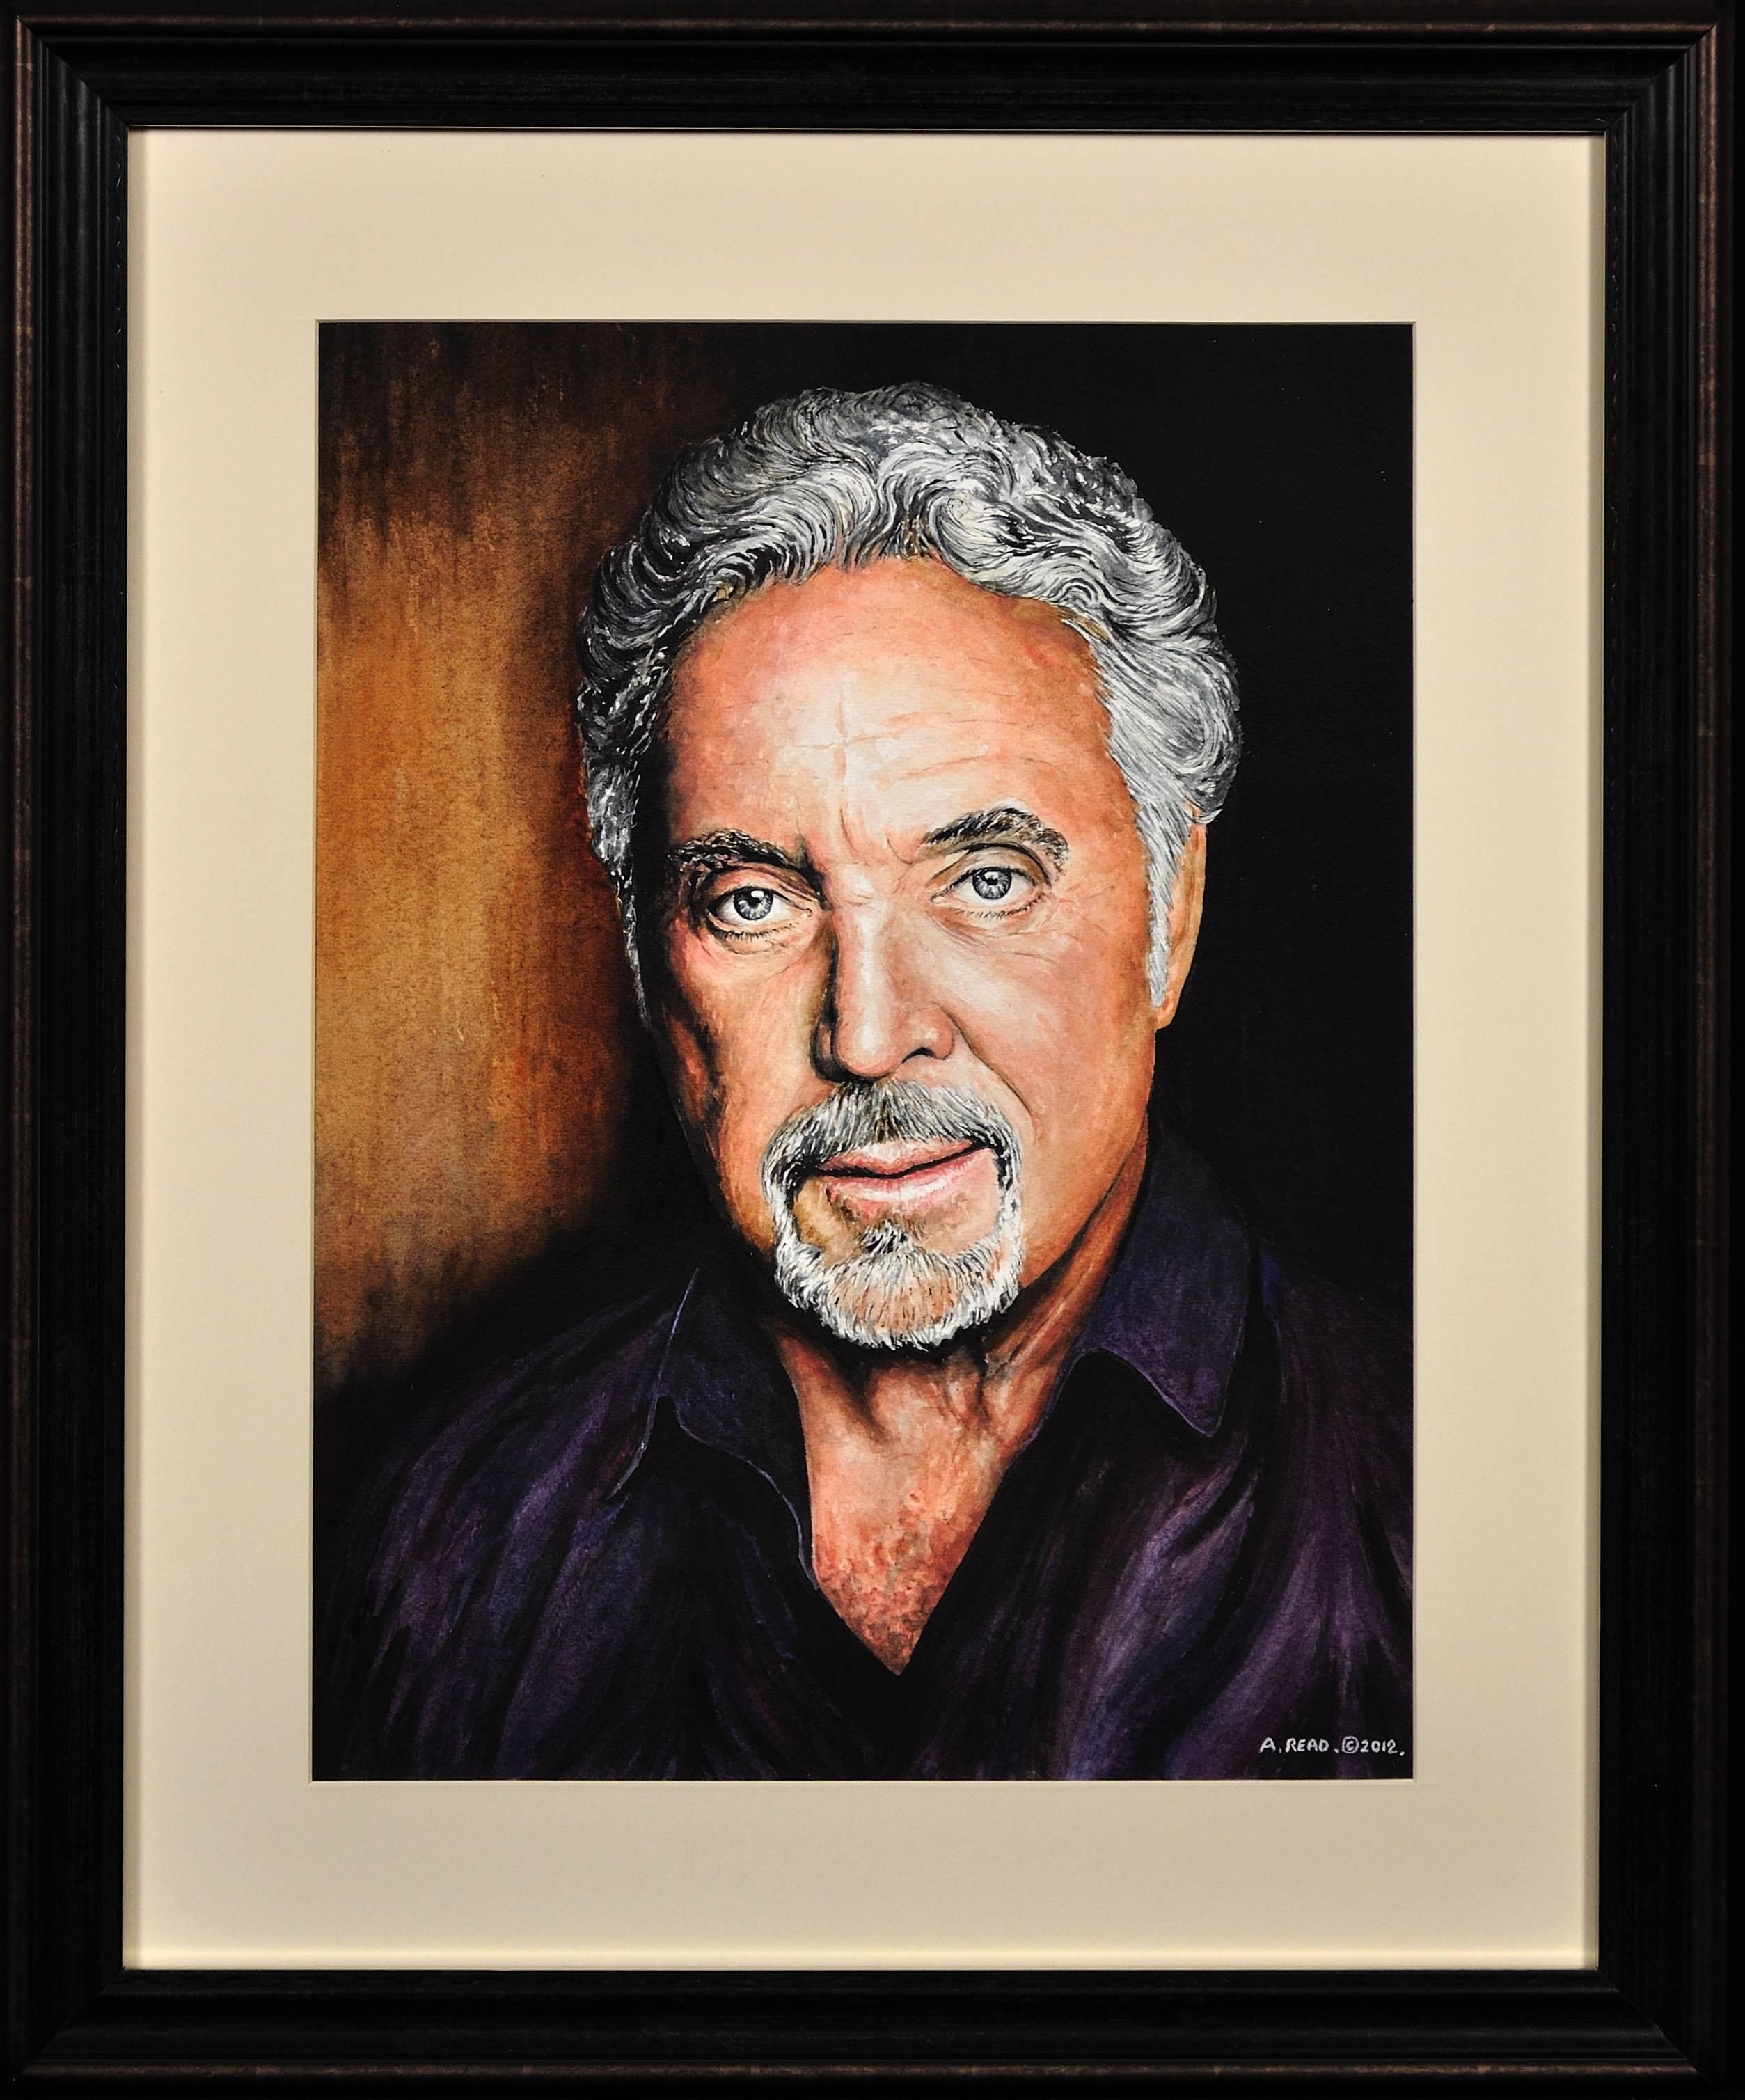 Andrew Read Portrait - Tom Jones. Brilliant and popular as ever and is truly The Voice! Team Tom.